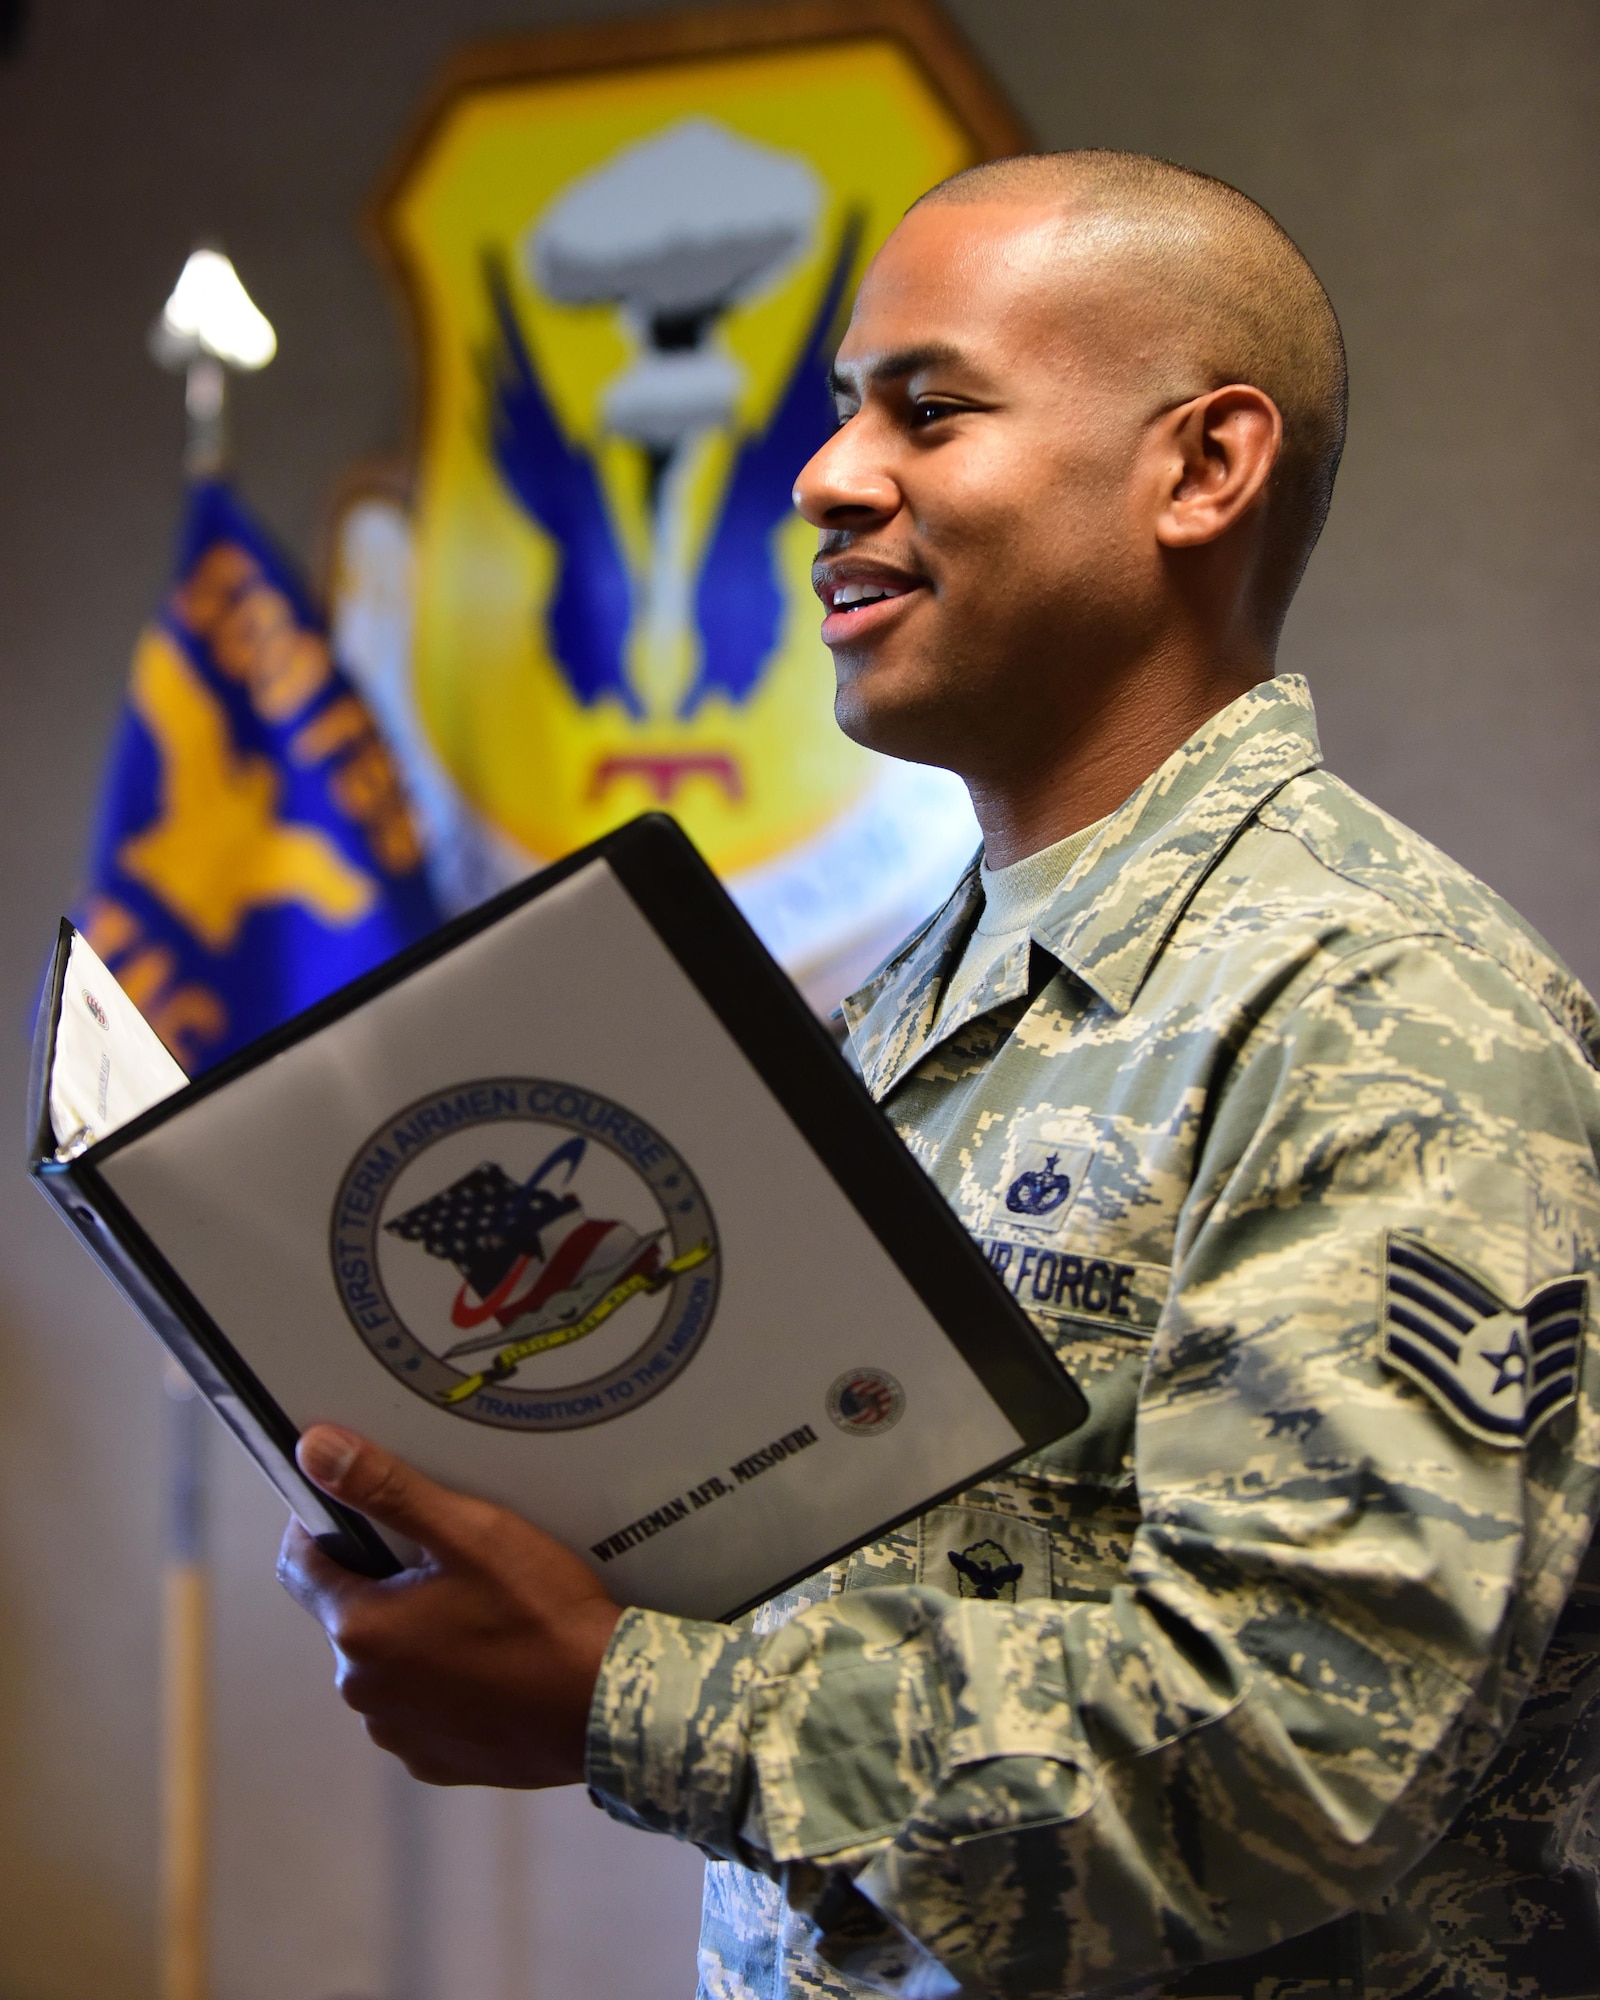 U.S. Air Force Staff Sgt. Bryan Robinson, the First Term Airmen Course (FTAC) NCO in charge, prepares for the next class at Whiteman Air Force Base, Mo., Aug. 17, 2017. FTAC is designed to help develop Air Force personnel with a mission mindset, character and core values.